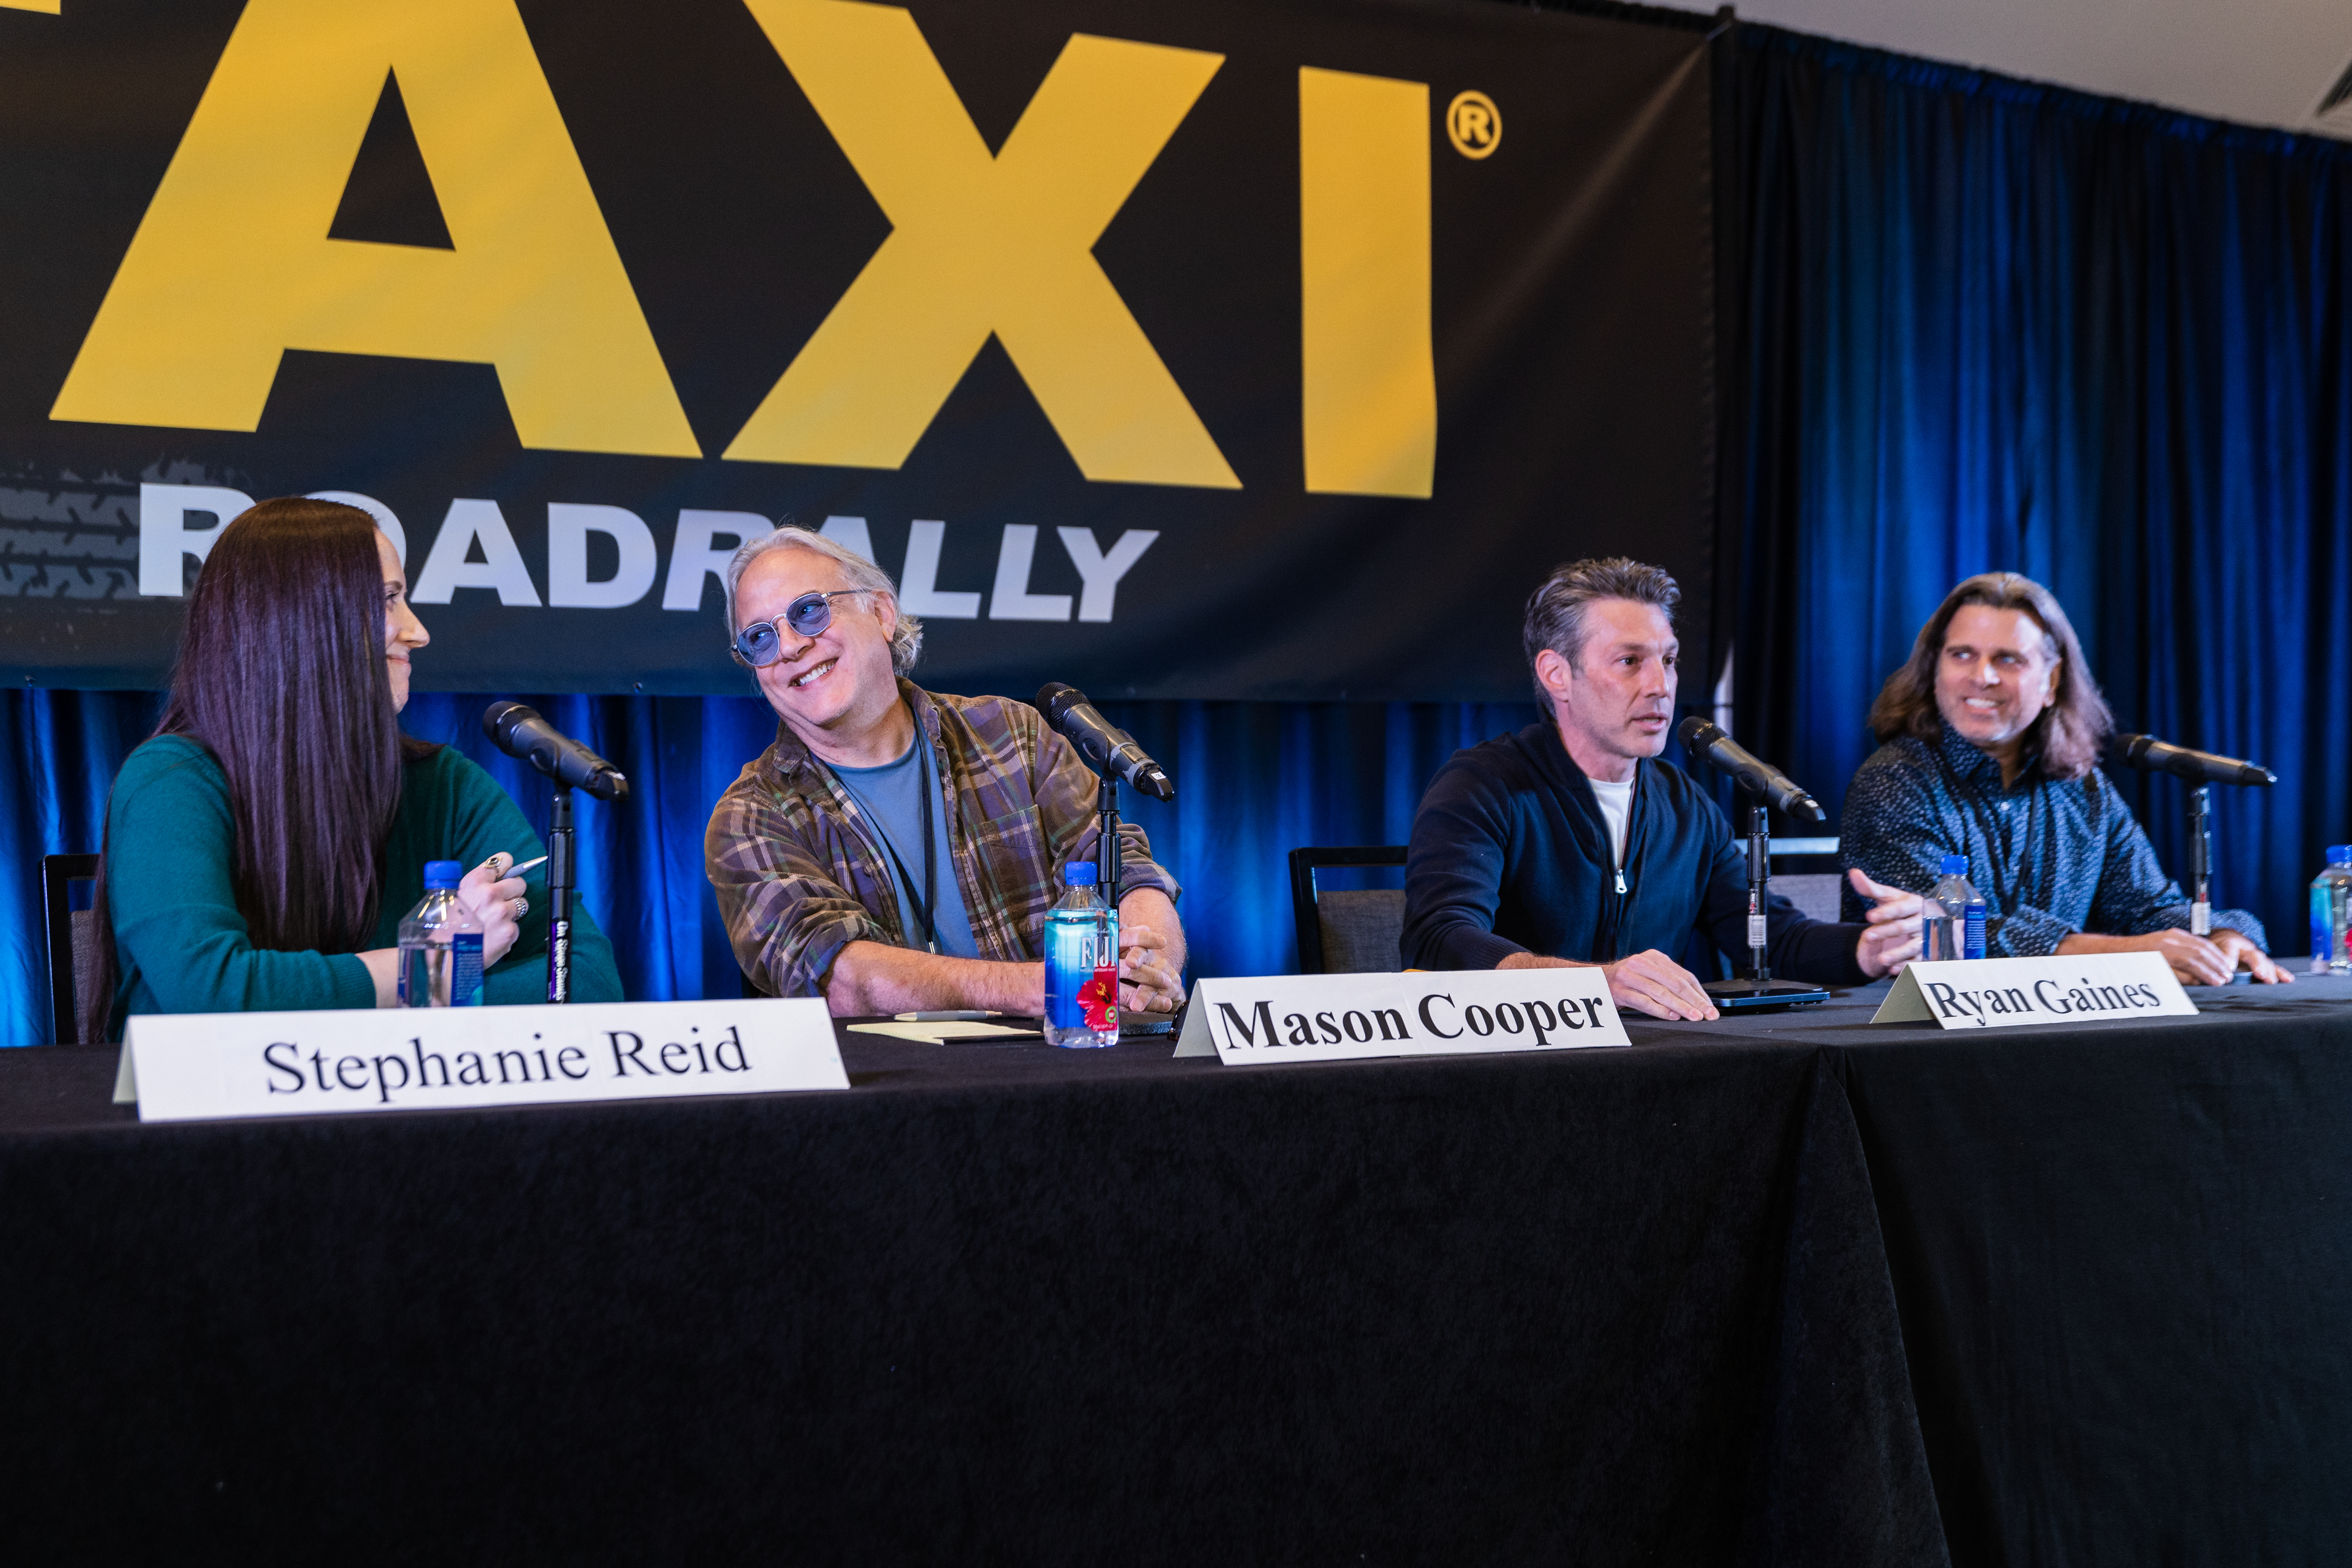 Stephanie Reid, Mason Cooper, Ryan Gaines, and Jerry Pilato found a lot of music they liked on the Film and TV Songs Pitch Panel. This panel involves music licensing executives and music supervisors listening to randomly drawn music from TAXI members.